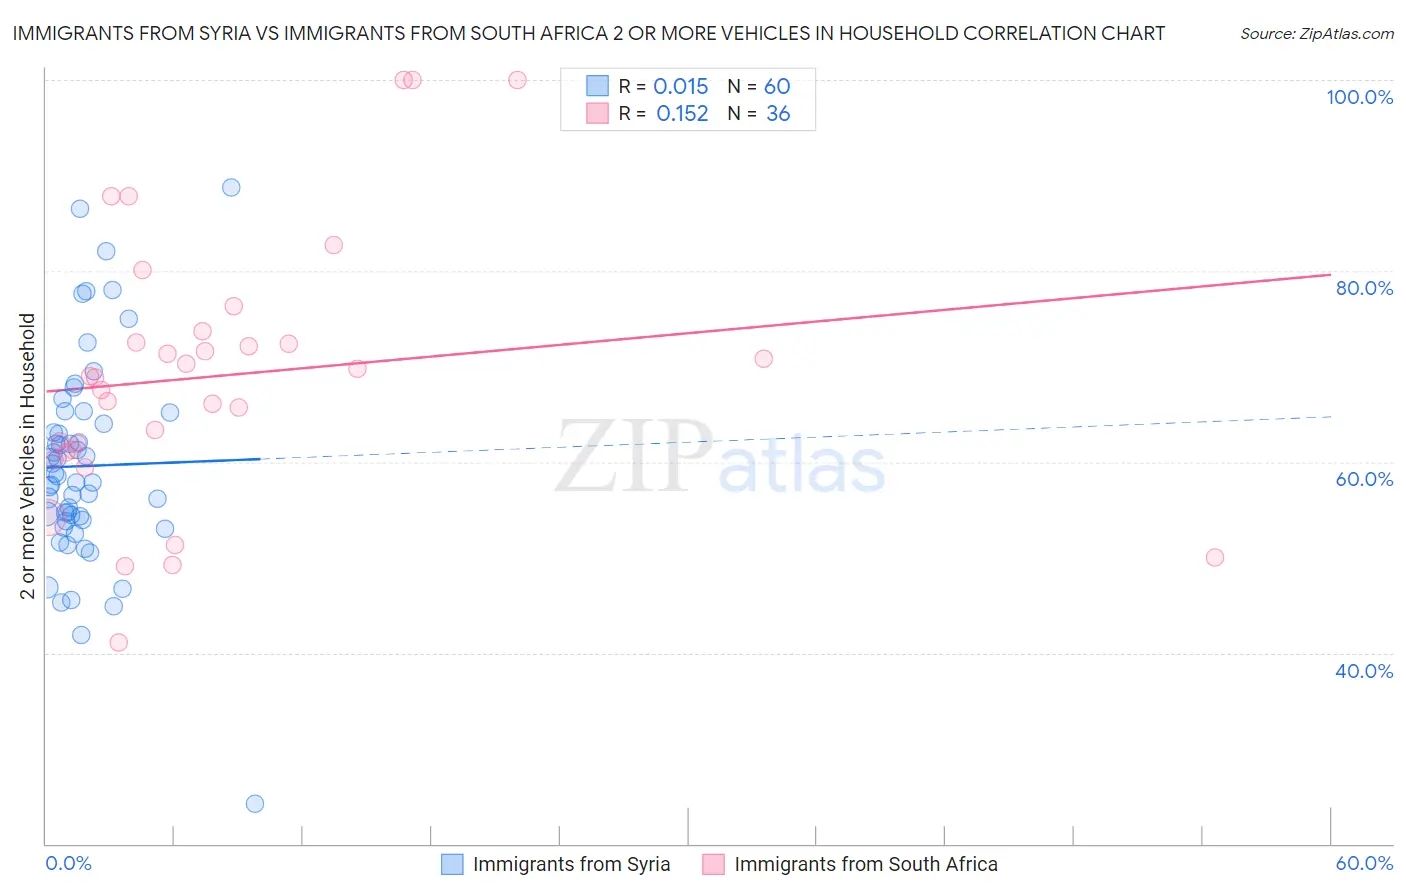 Immigrants from Syria vs Immigrants from South Africa 2 or more Vehicles in Household